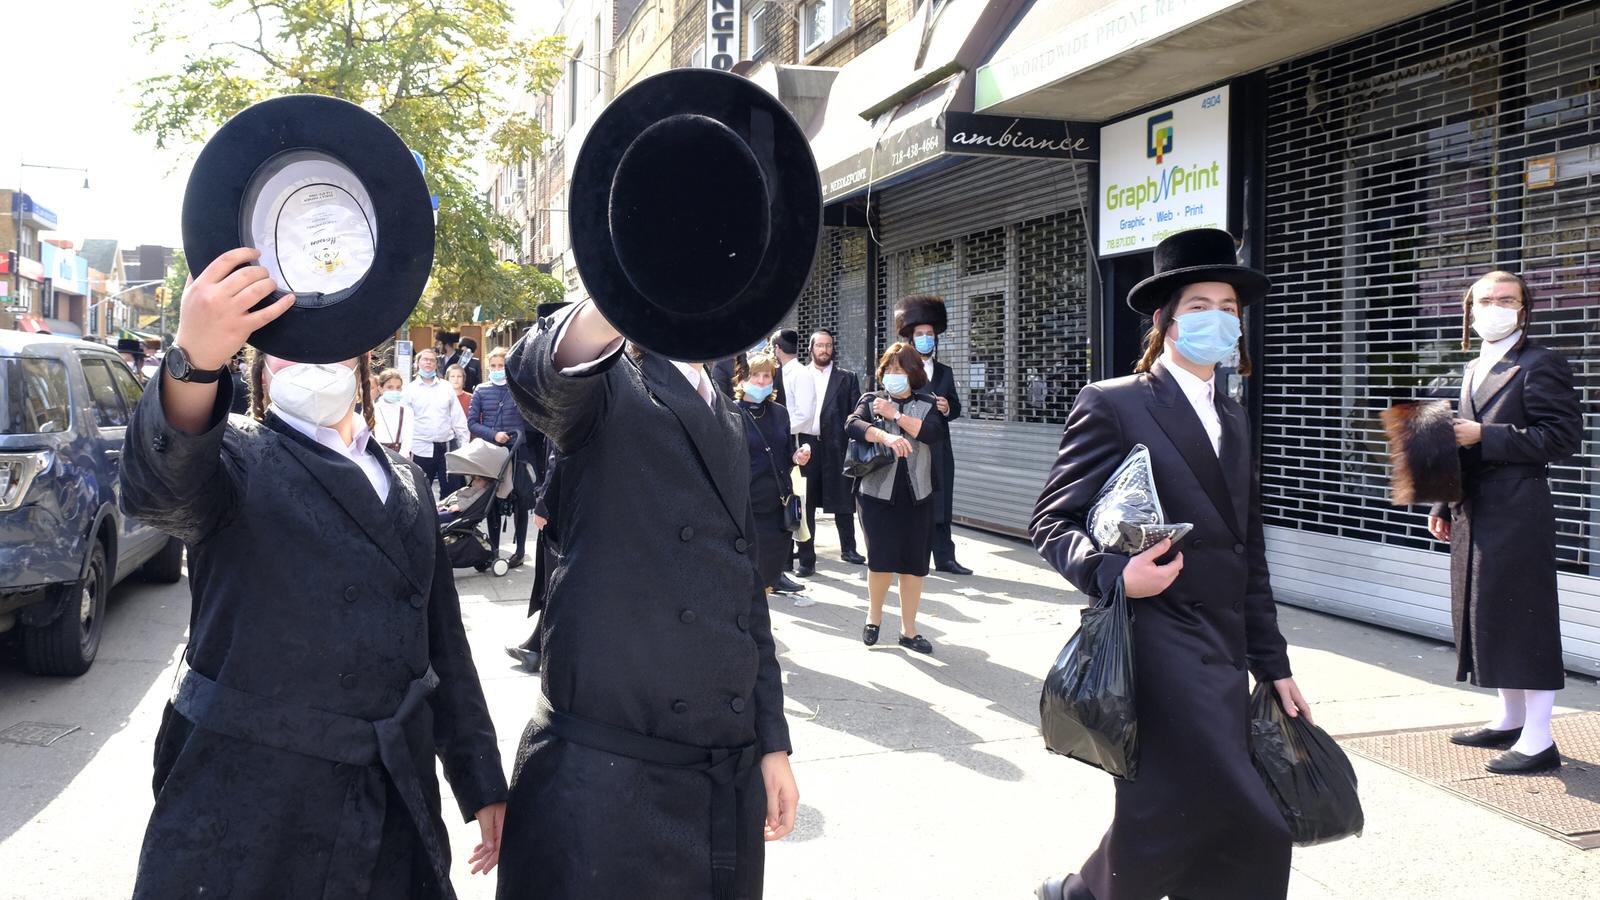 Brooklyn - October 7, 2020 - A group of Orthodox Jewish teenagers some wearing facial mask tries to block this photographer from taking pictures on 13th Avenue near 49th Street in the Borough Park section of Brooklyn Wednesday afternoon. NYPD 66th Precinct Officers showed at the scene but did not ticket or warned the mask less members of the crowd. New Yorkers who hold mass gatherings will be fined up to $15,000 per day, Mayor de Blasio announced Wednesday, the latest step aimed at cracking down on an alarming spike in COVID cases in parts of Brooklyn and Queens. (Luiz C. Ribeiro for New York Daily News)